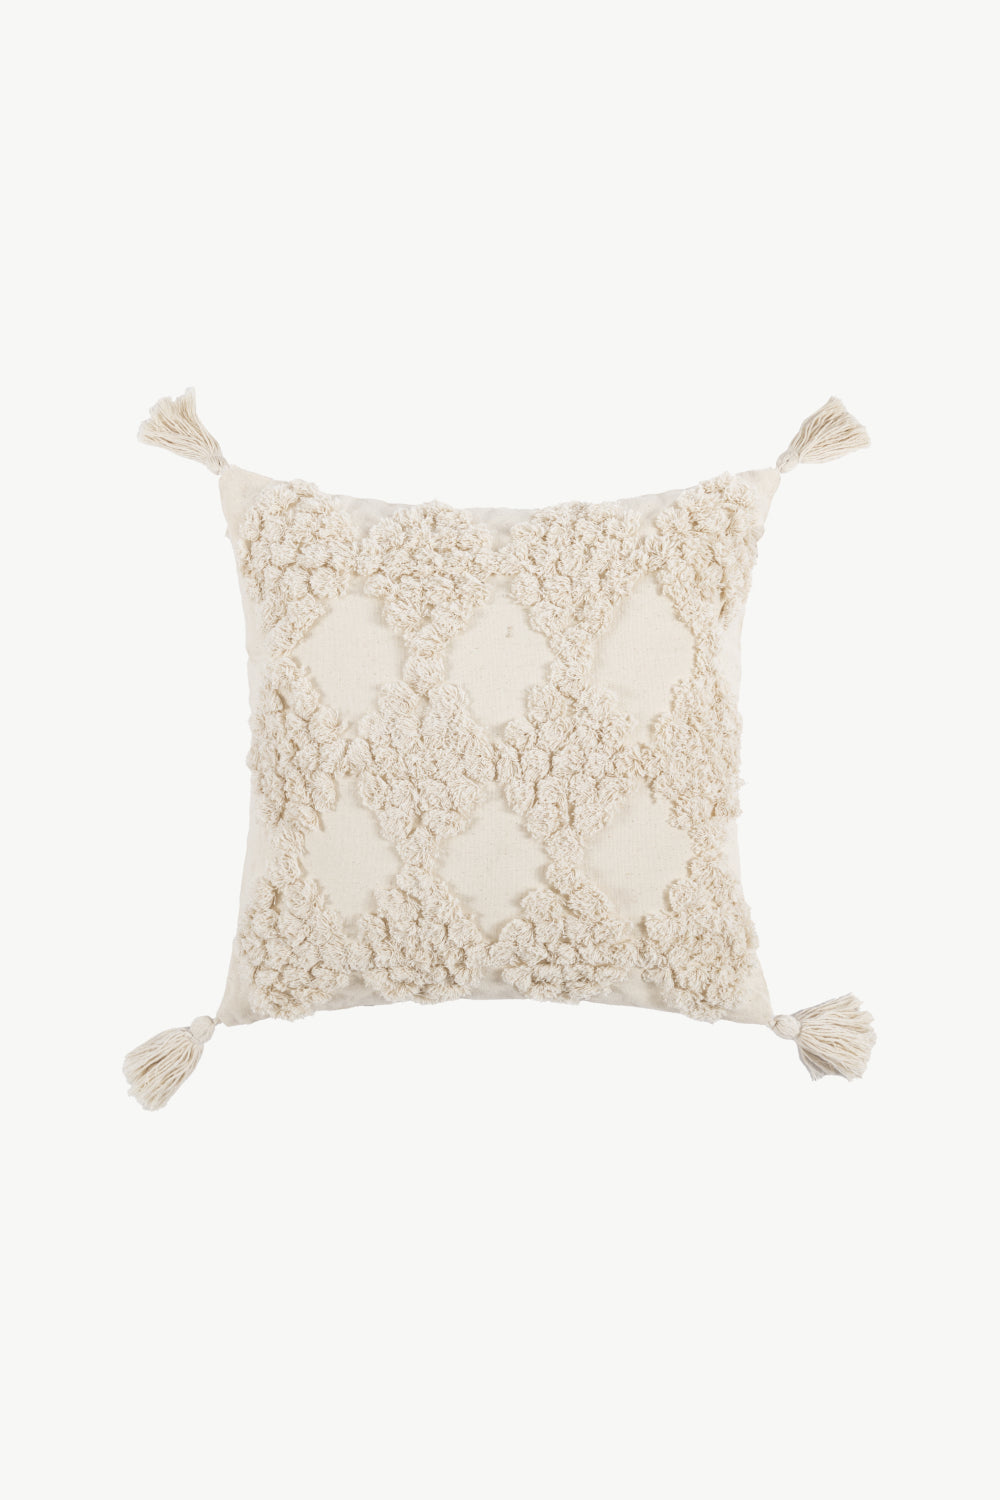 8 Styles Decorative Fringe Pillow Cover